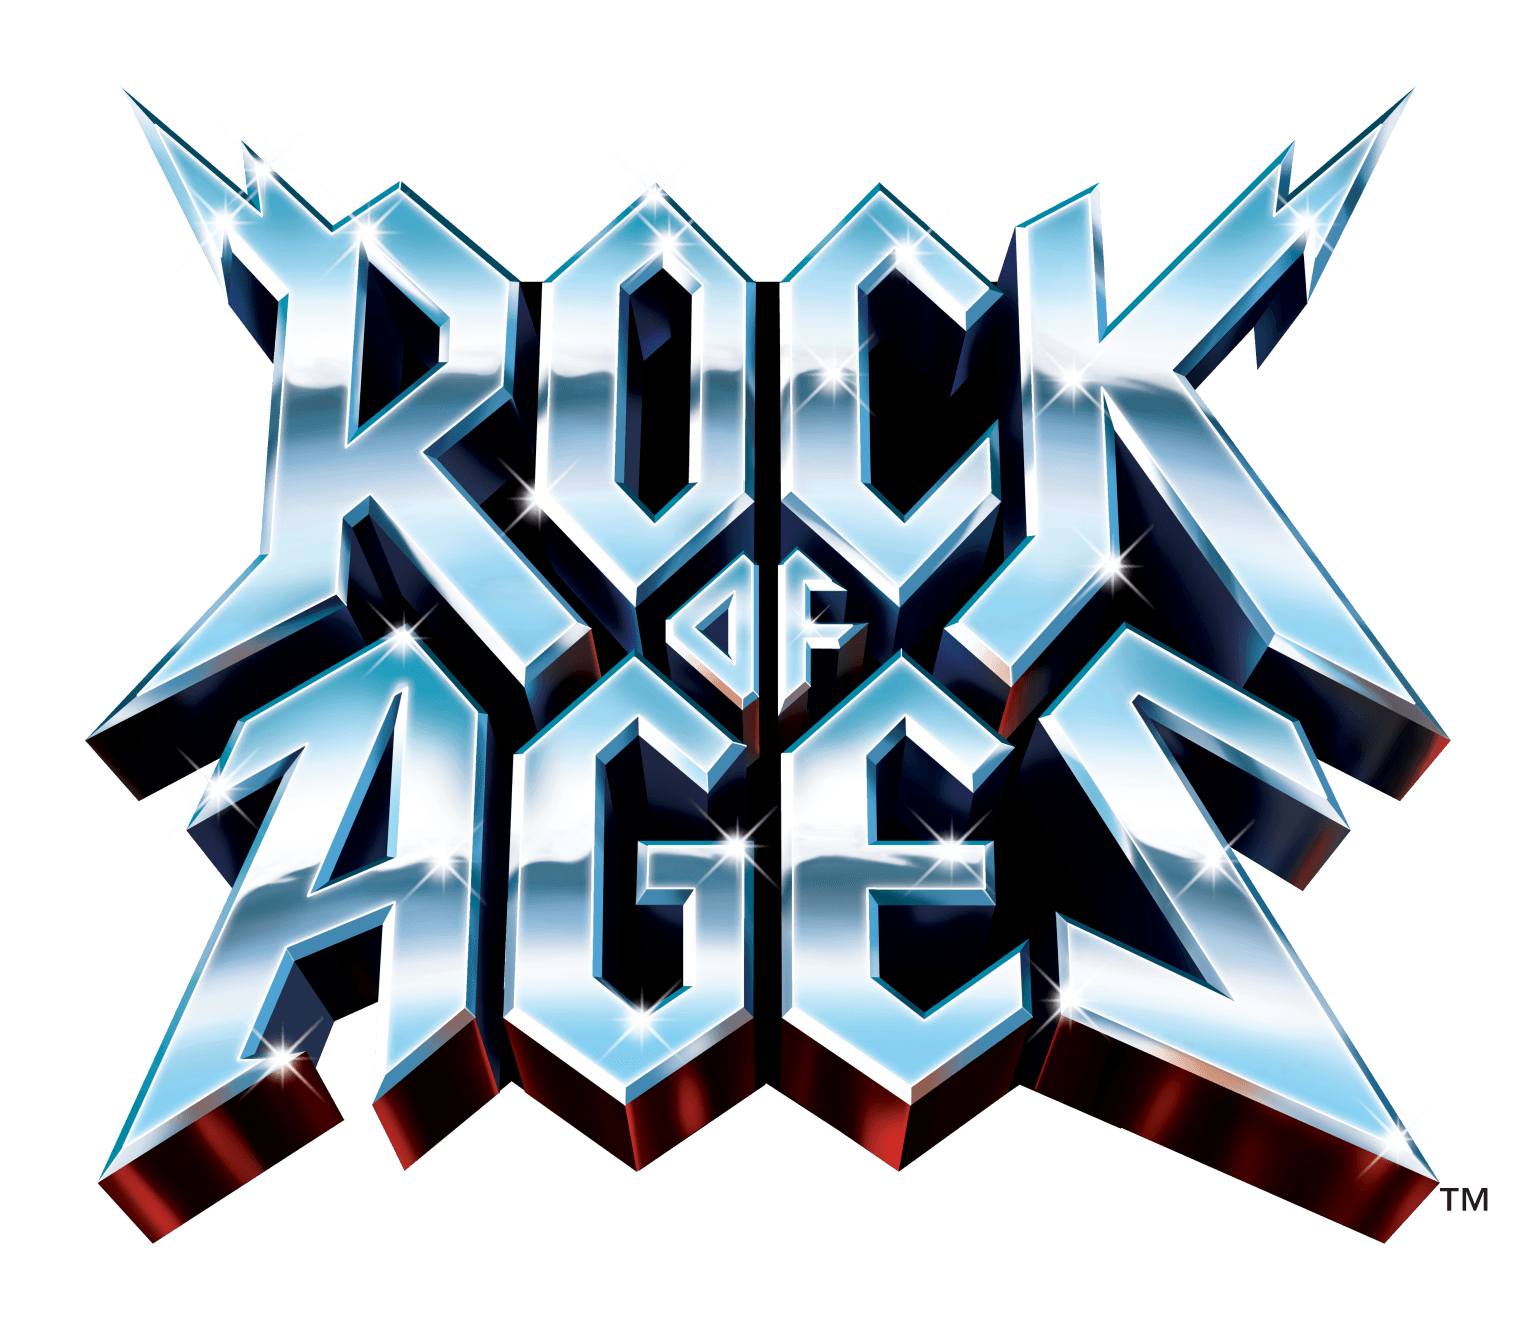 Rock Of Ages Logo Broadway Palm Dinner Theatre